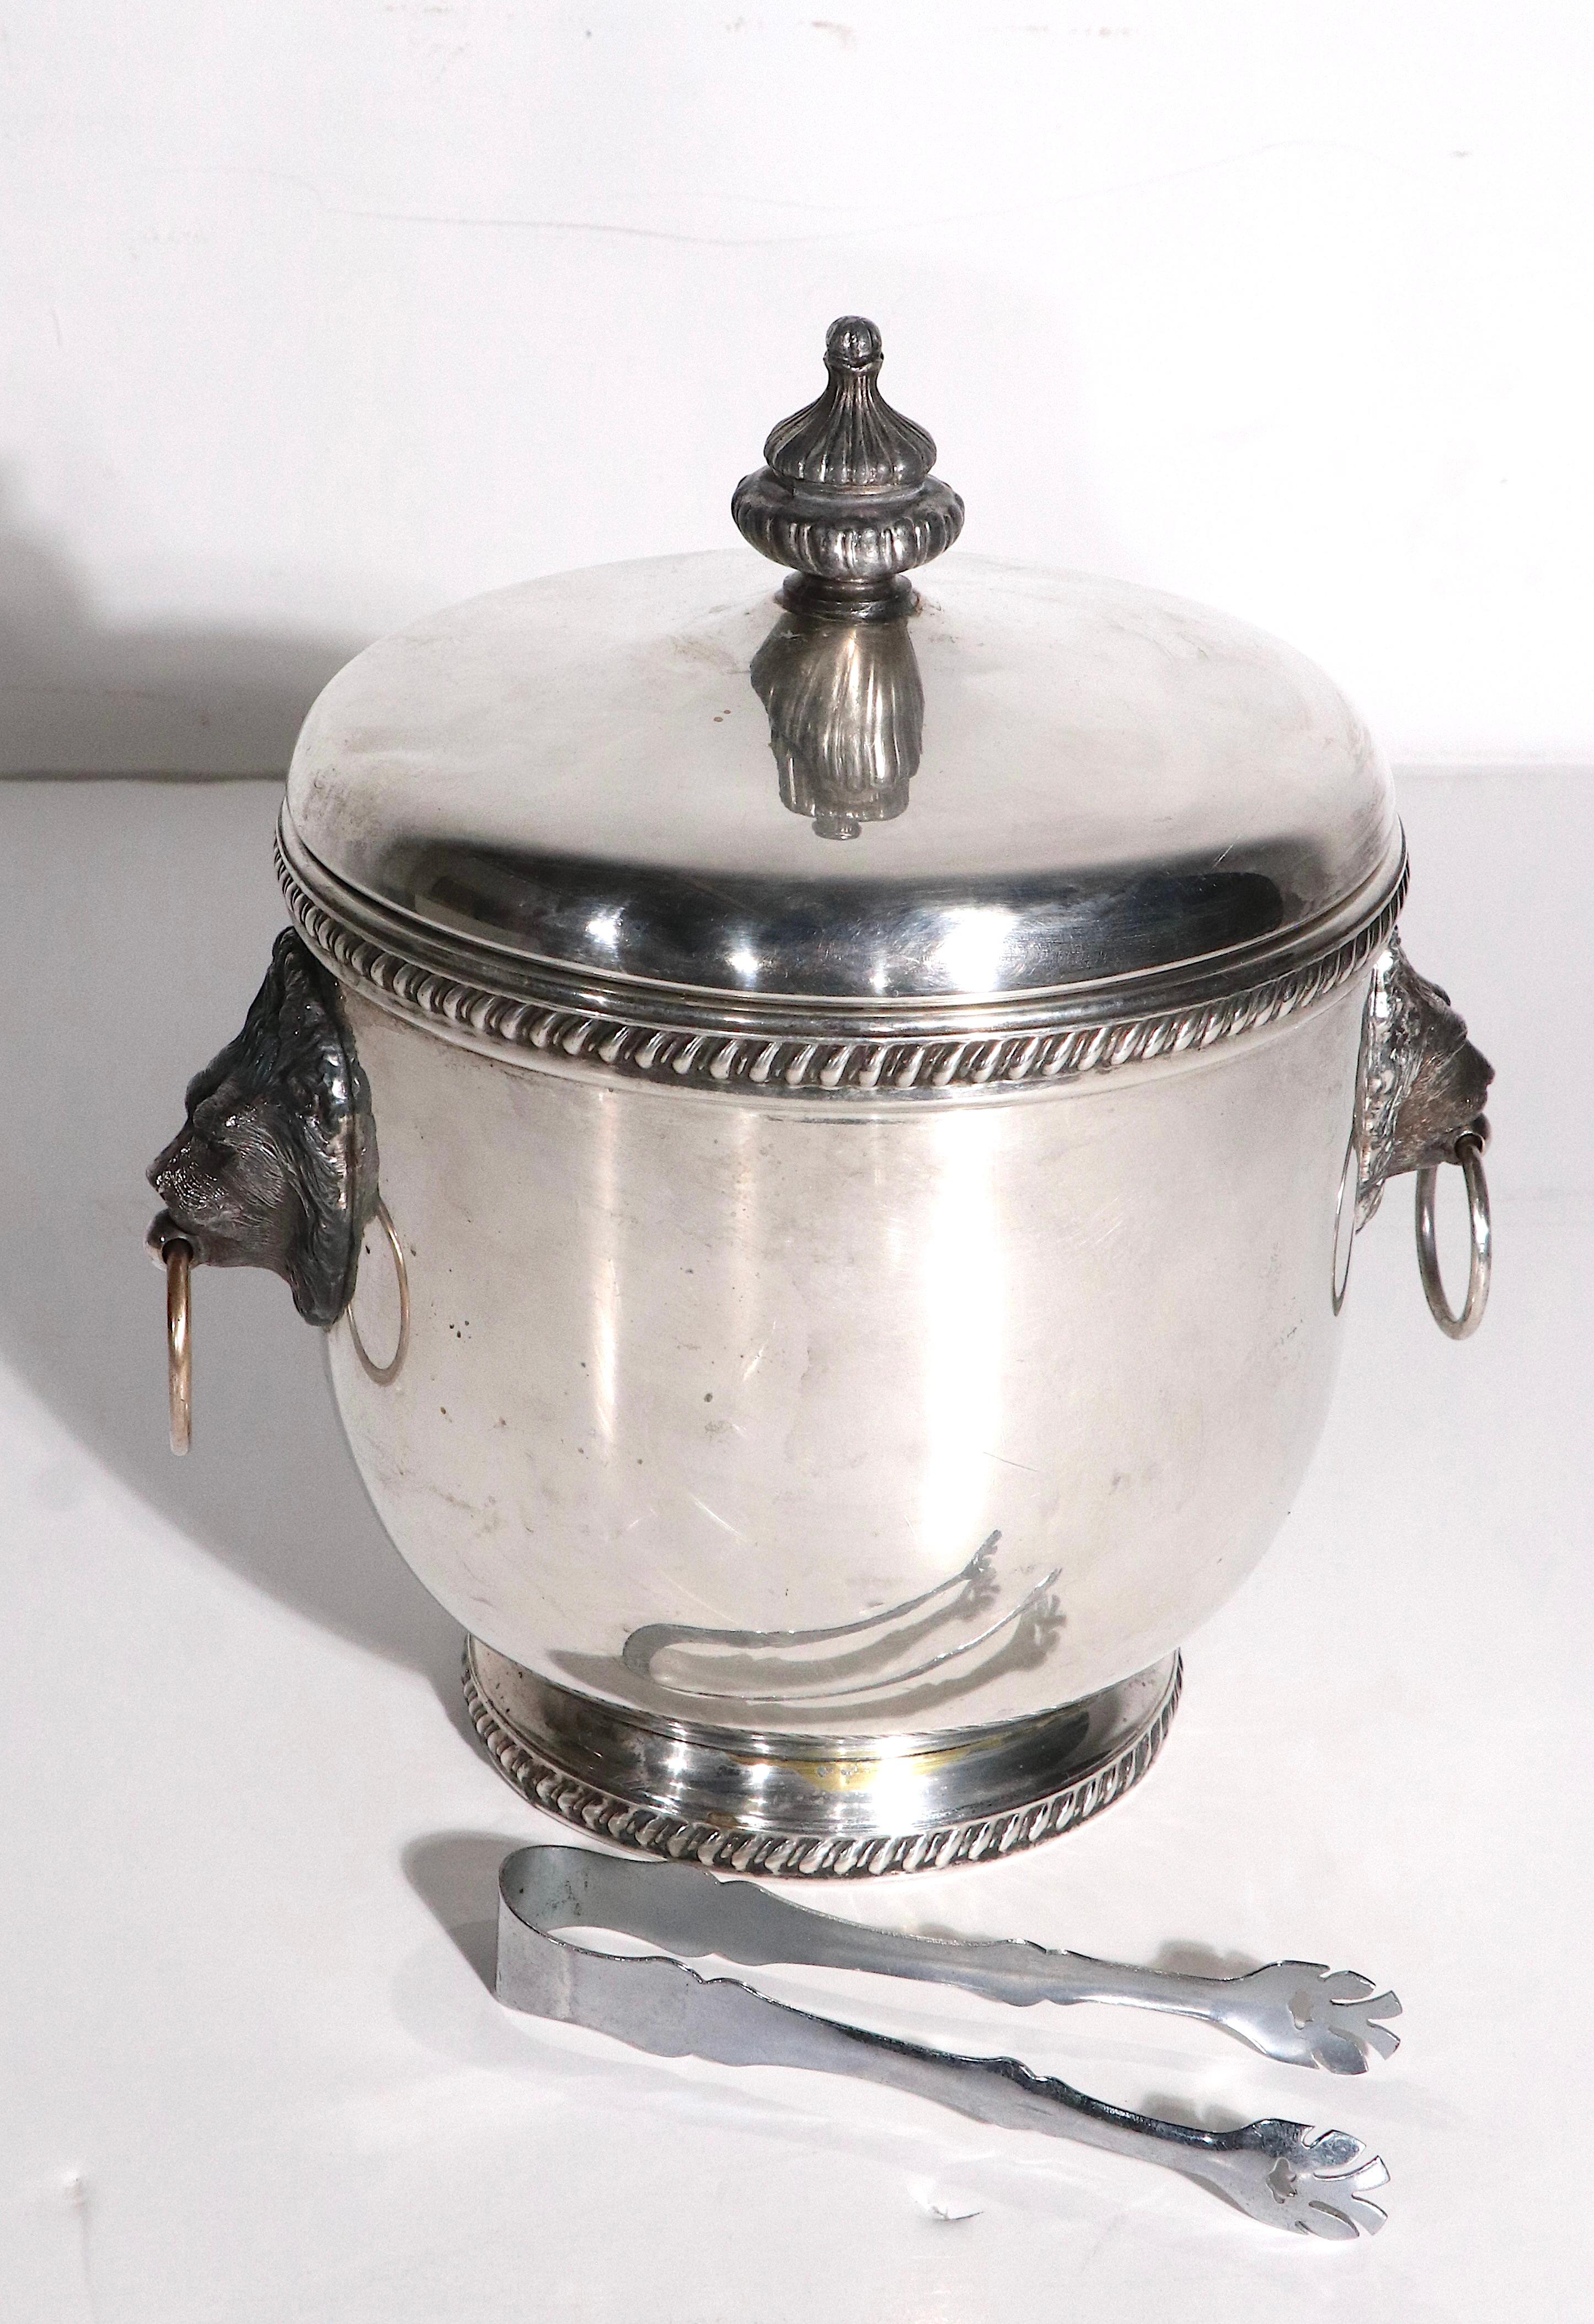 Silver plate ice bucket by The Sheffield Silver Company. The ice bucket features lions head appliqués with ring handles, and  original white milk glass liner. This example is in  good original condition, showing some cosmetic wear and minor dents,